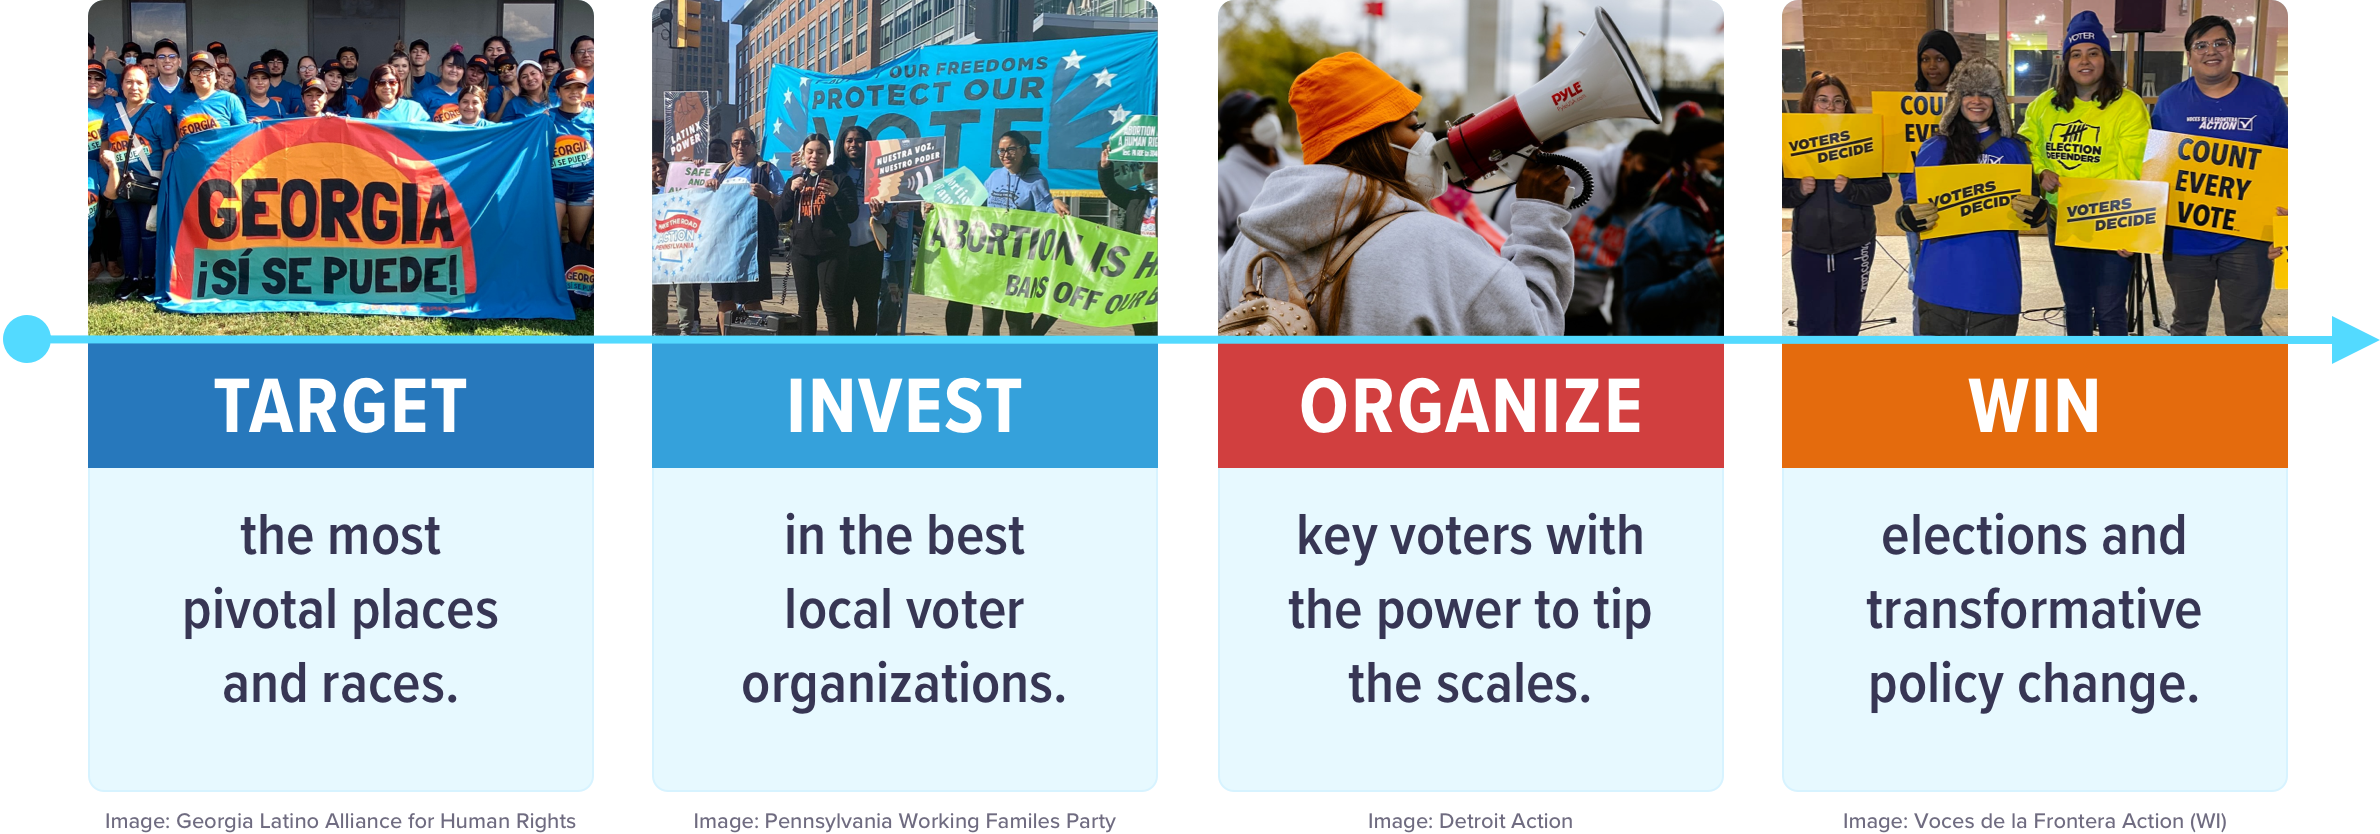 Graphic showing the MVP Model: Target the most pivotal places and races. Invest in the best local voter organizations. Organize key voters with the power to tip the scales. Win elections and transformative policy change.